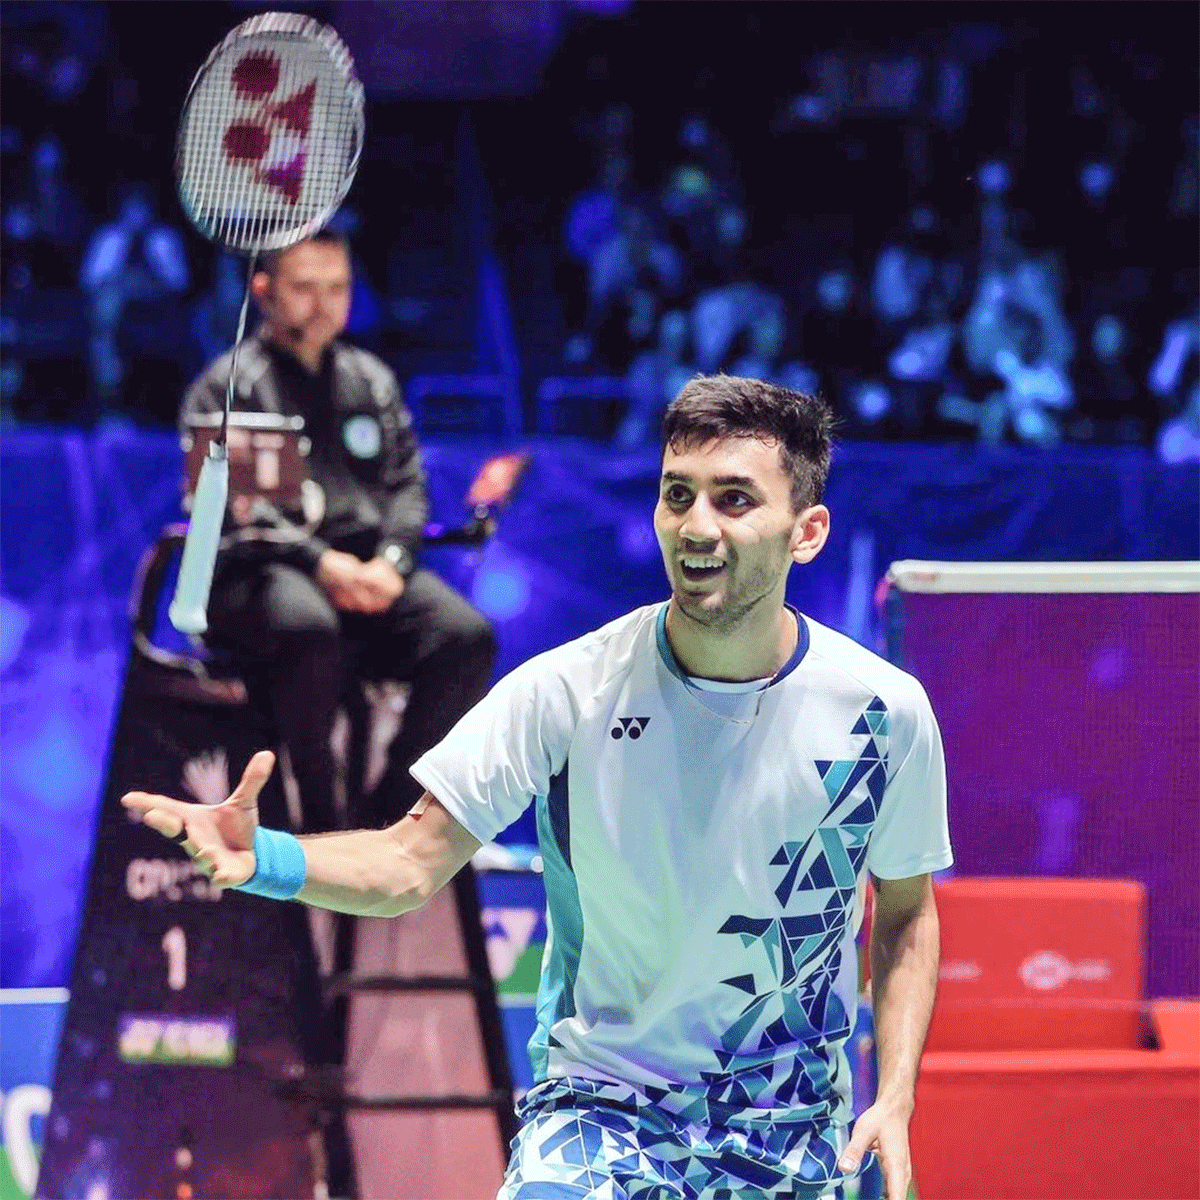 Lakshya Sen advanced to the US Open semis with a confident win over compatriot S Sankar Muthusamy Subramanian